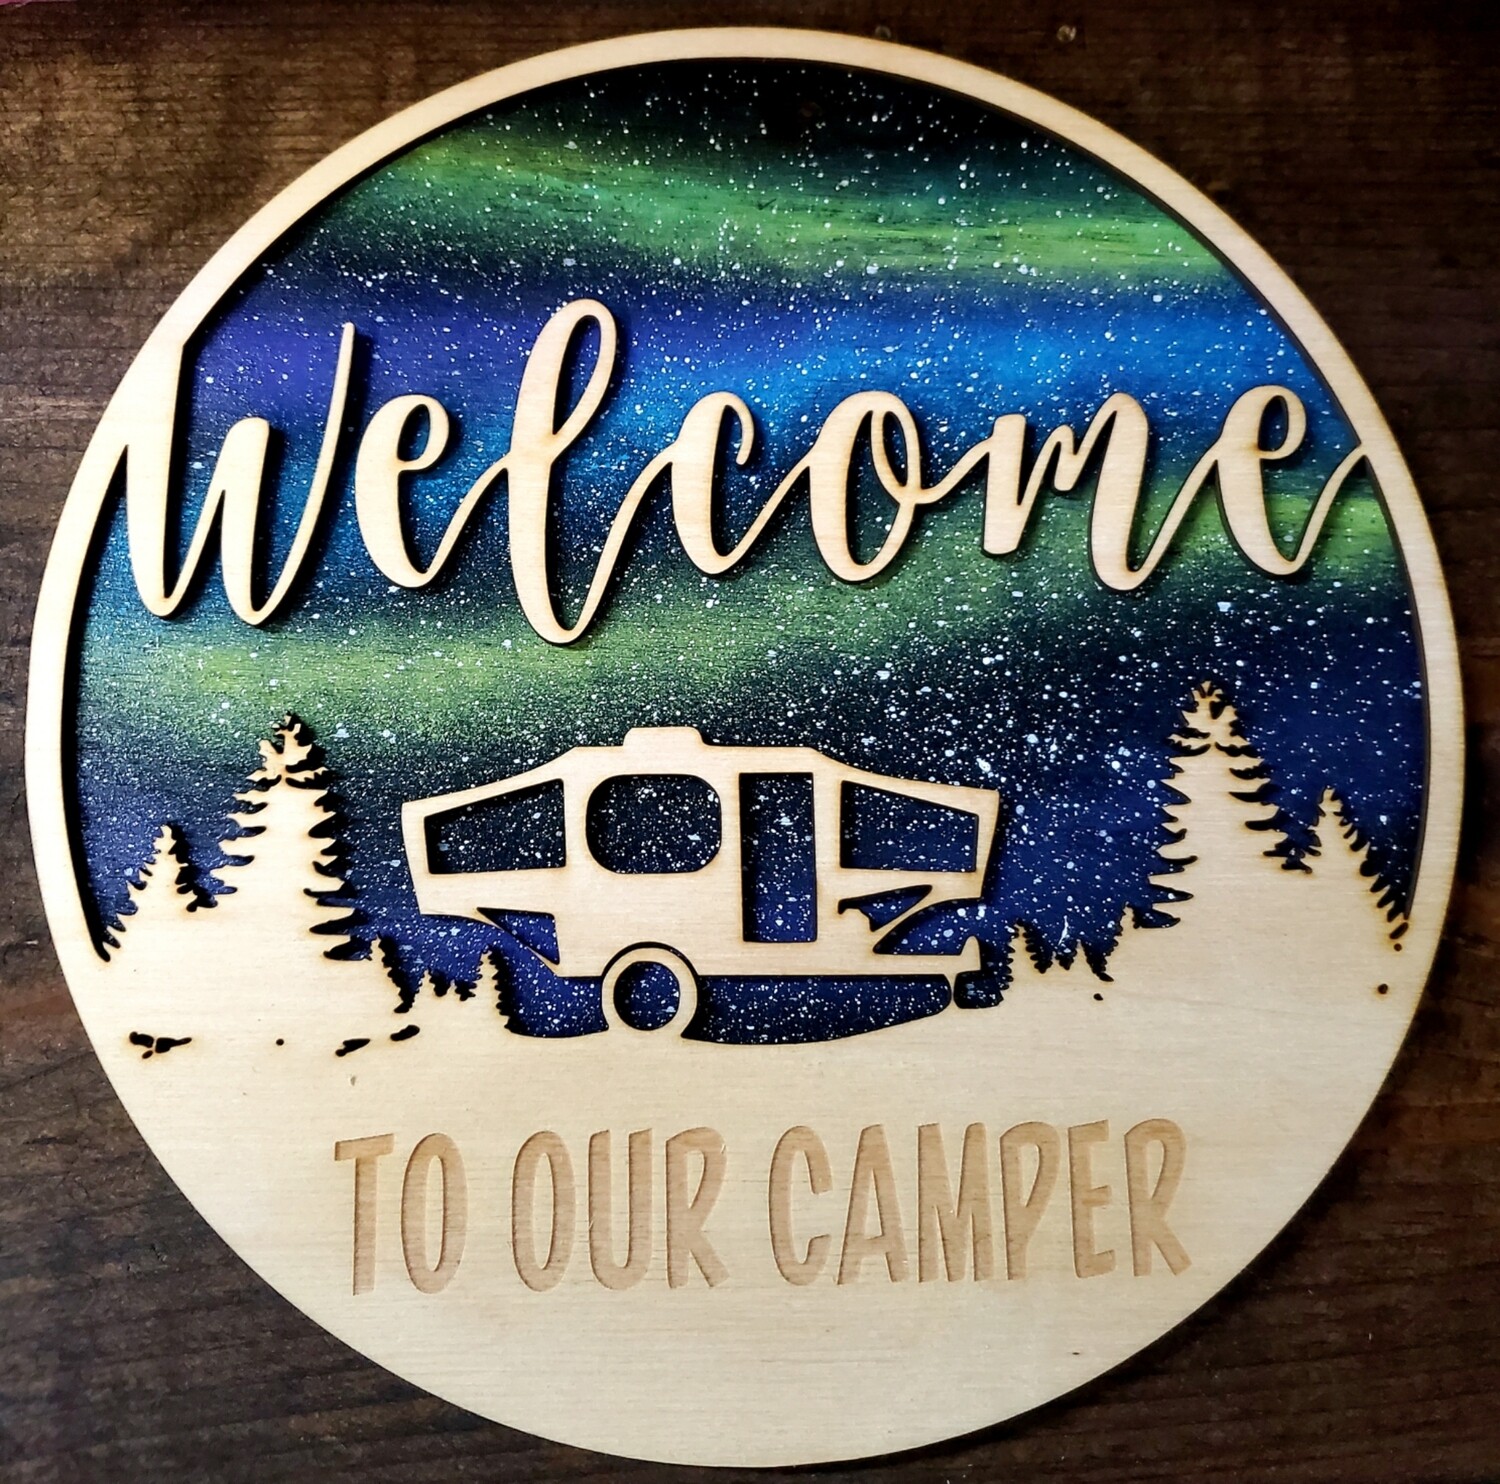 Welcome To Our Camper Northern Lights Sign 12"